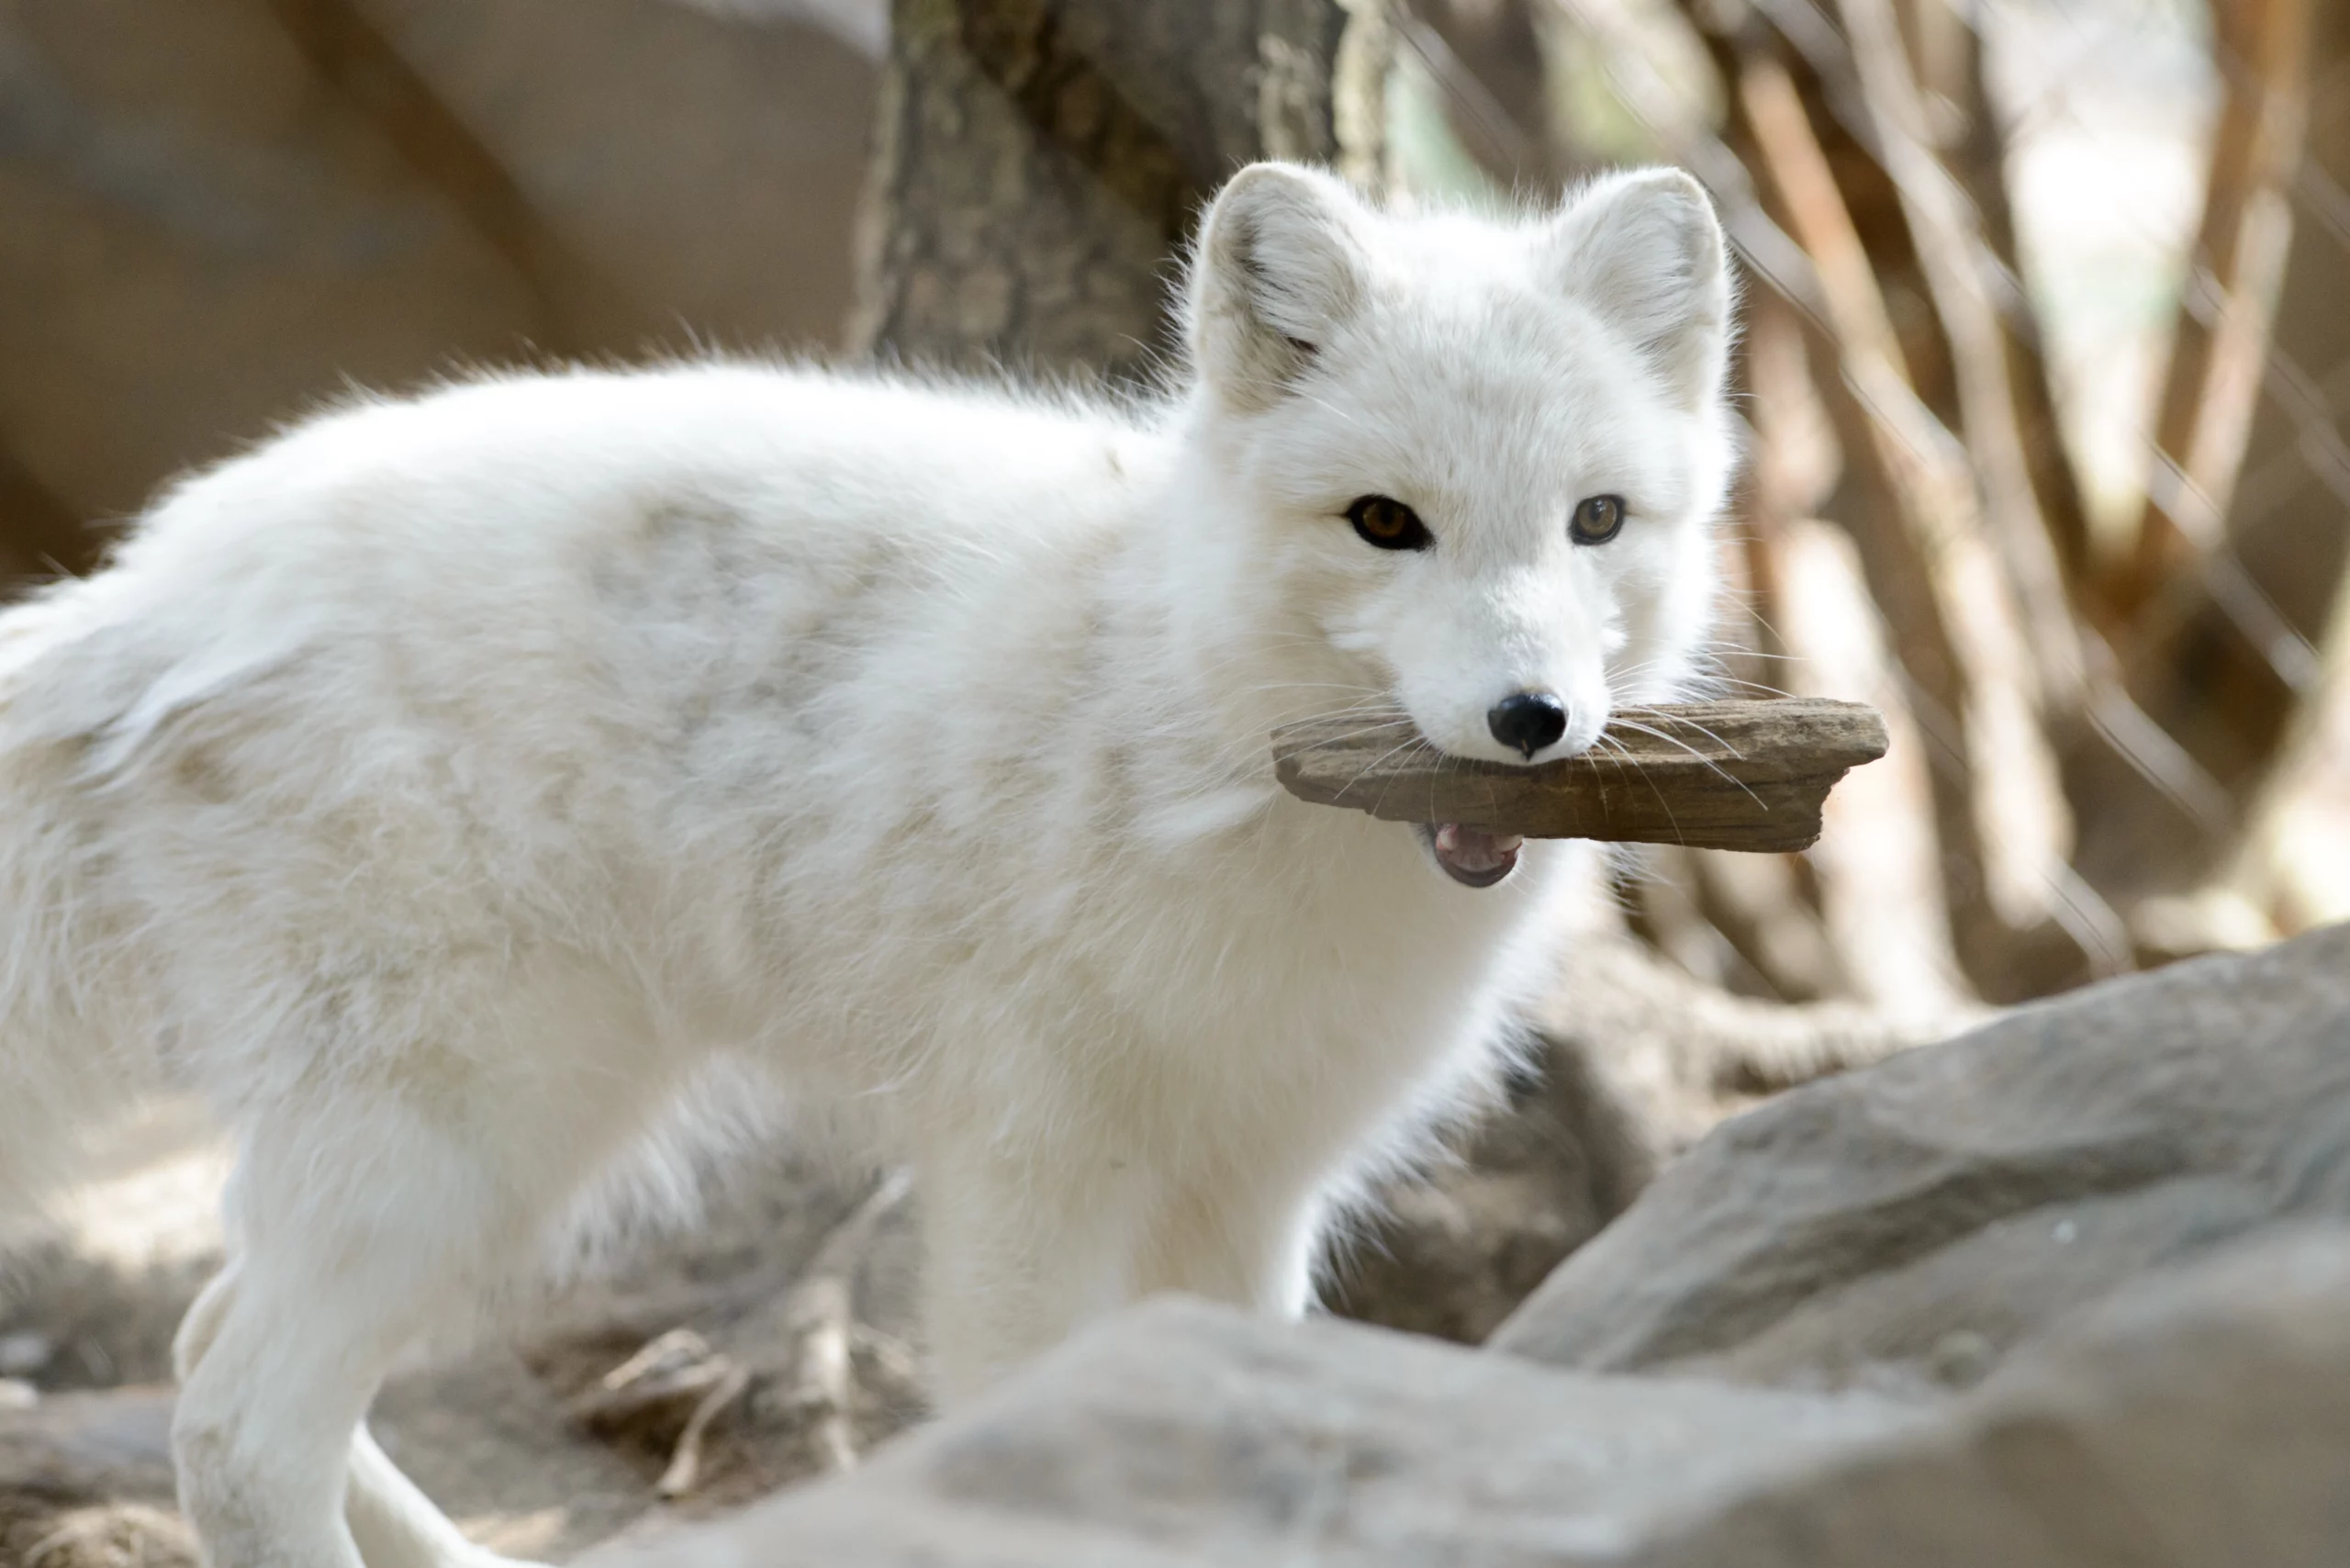 An arctic fox carrying a small stick in their mouth.